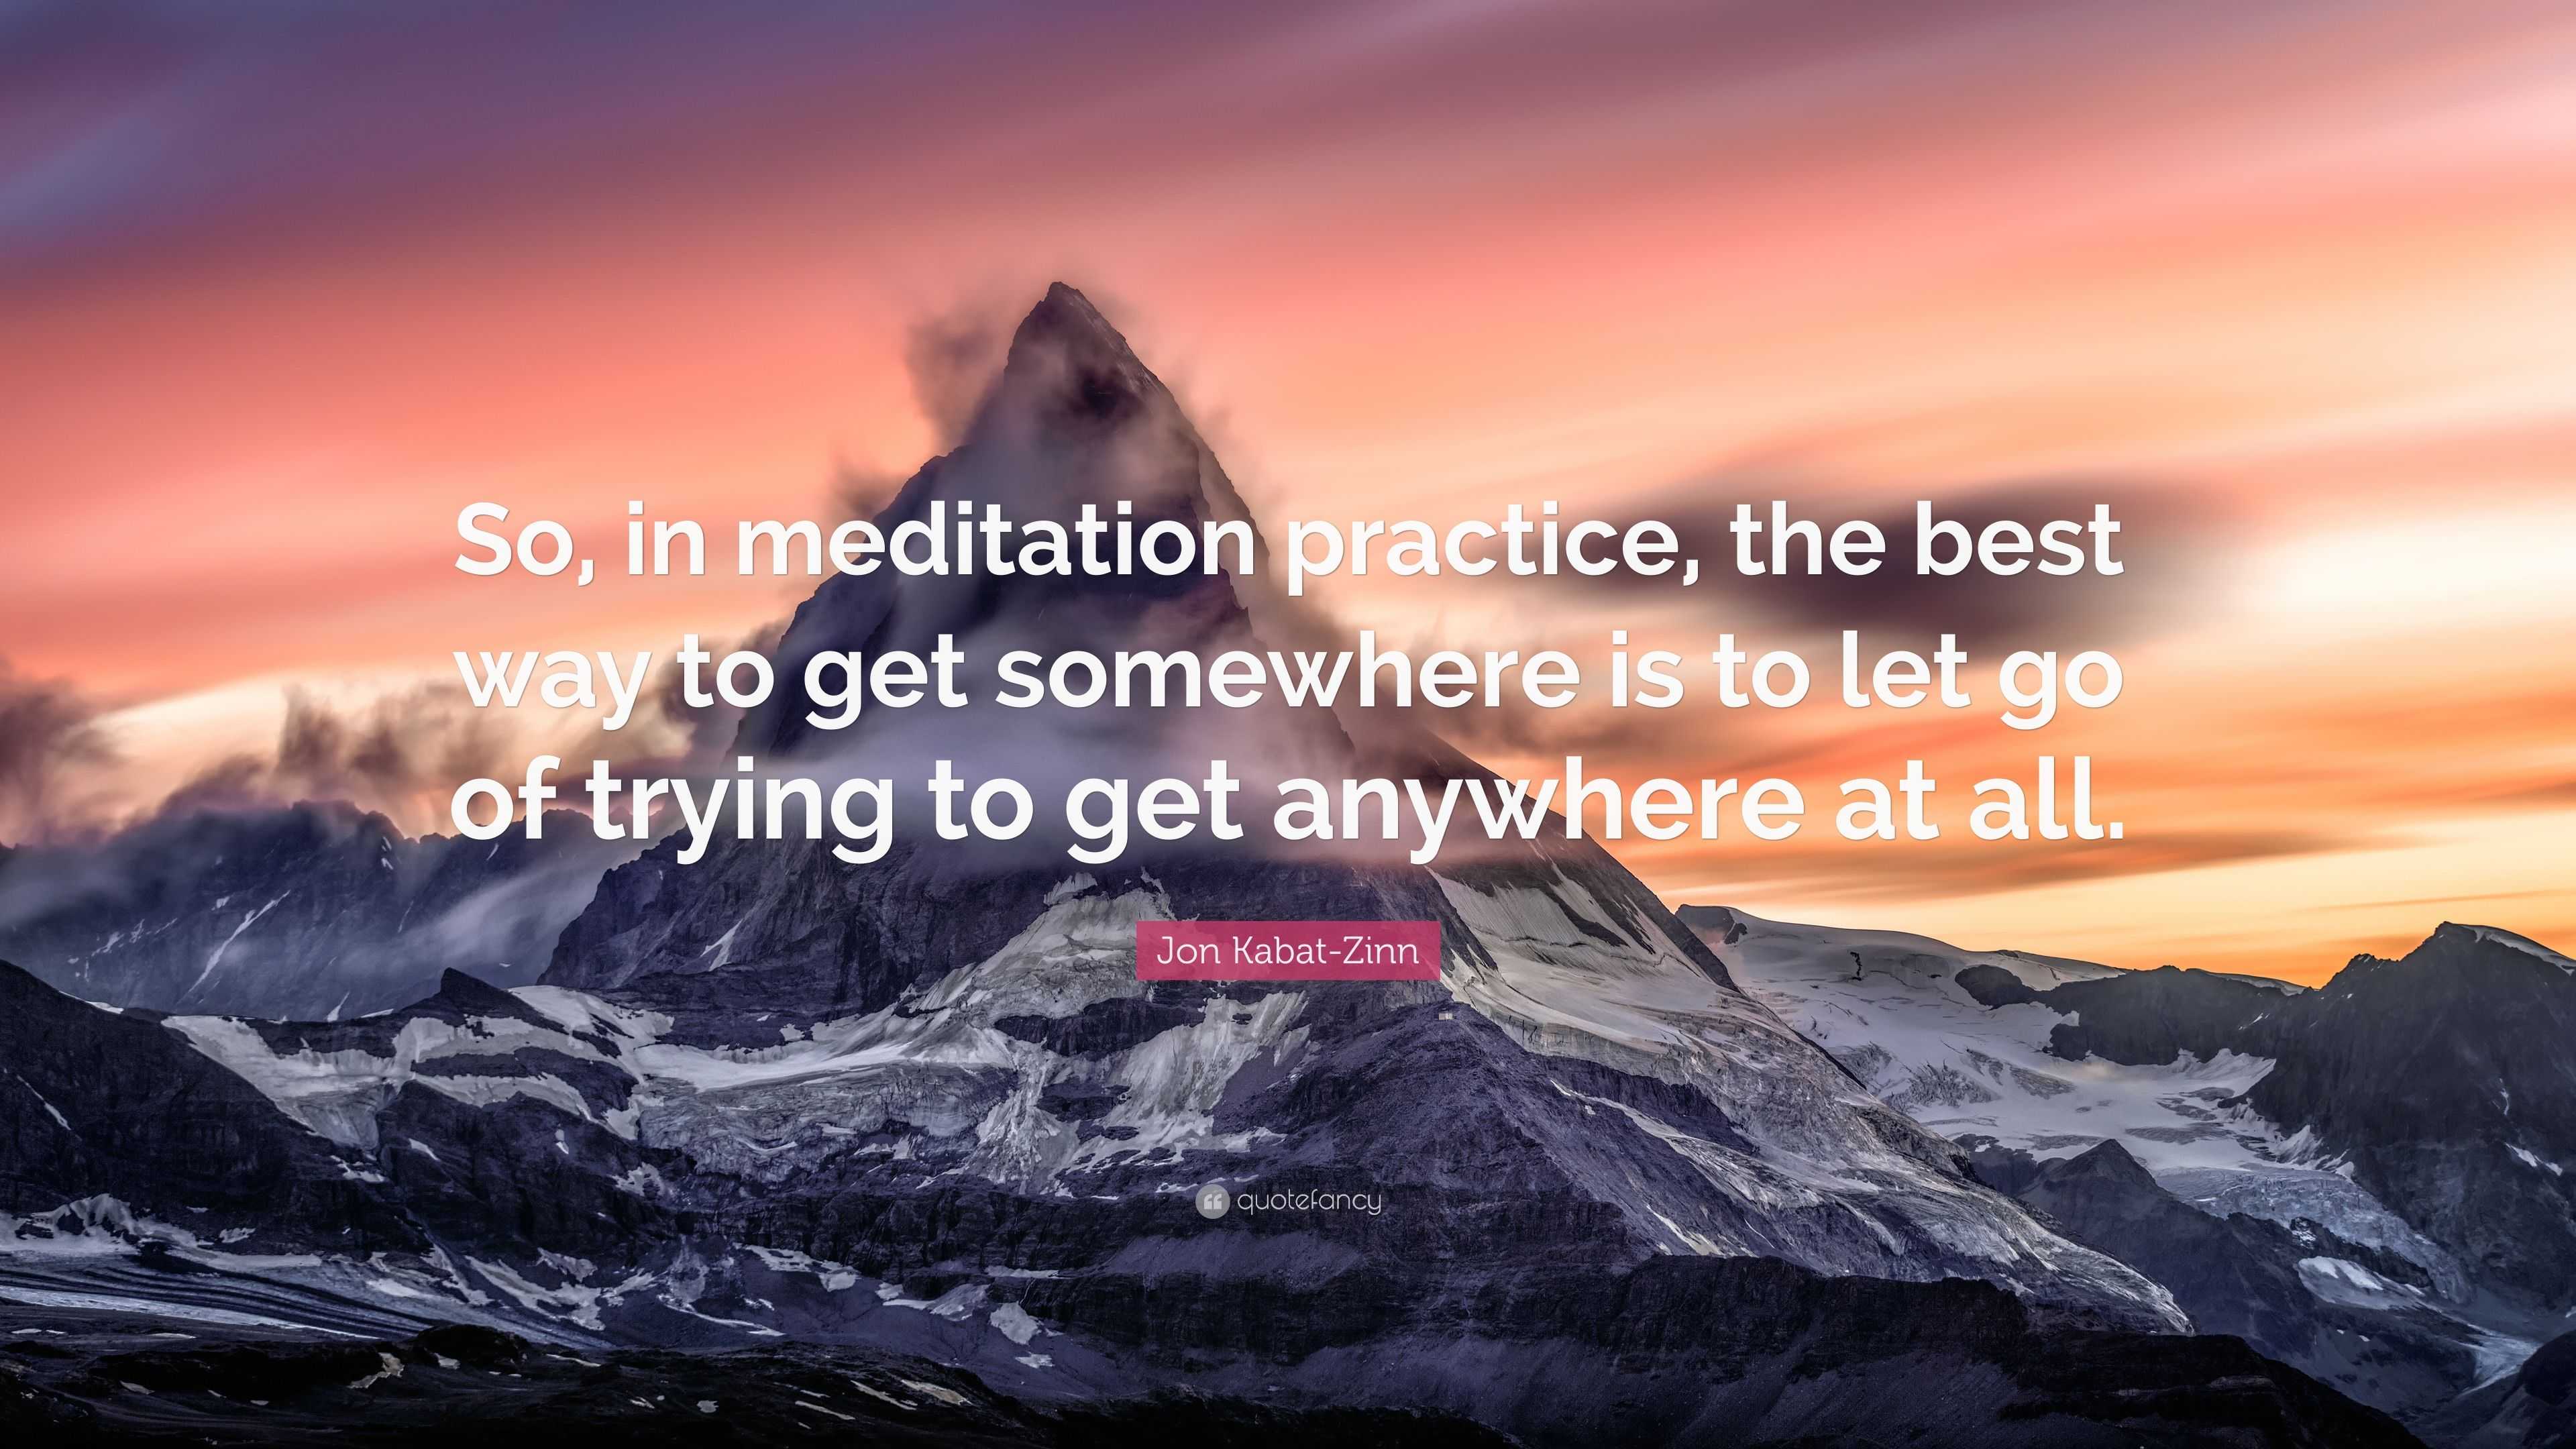 Jon Kabat-Zinn Quote: “So, in meditation practice, the best way to get  somewhere is to